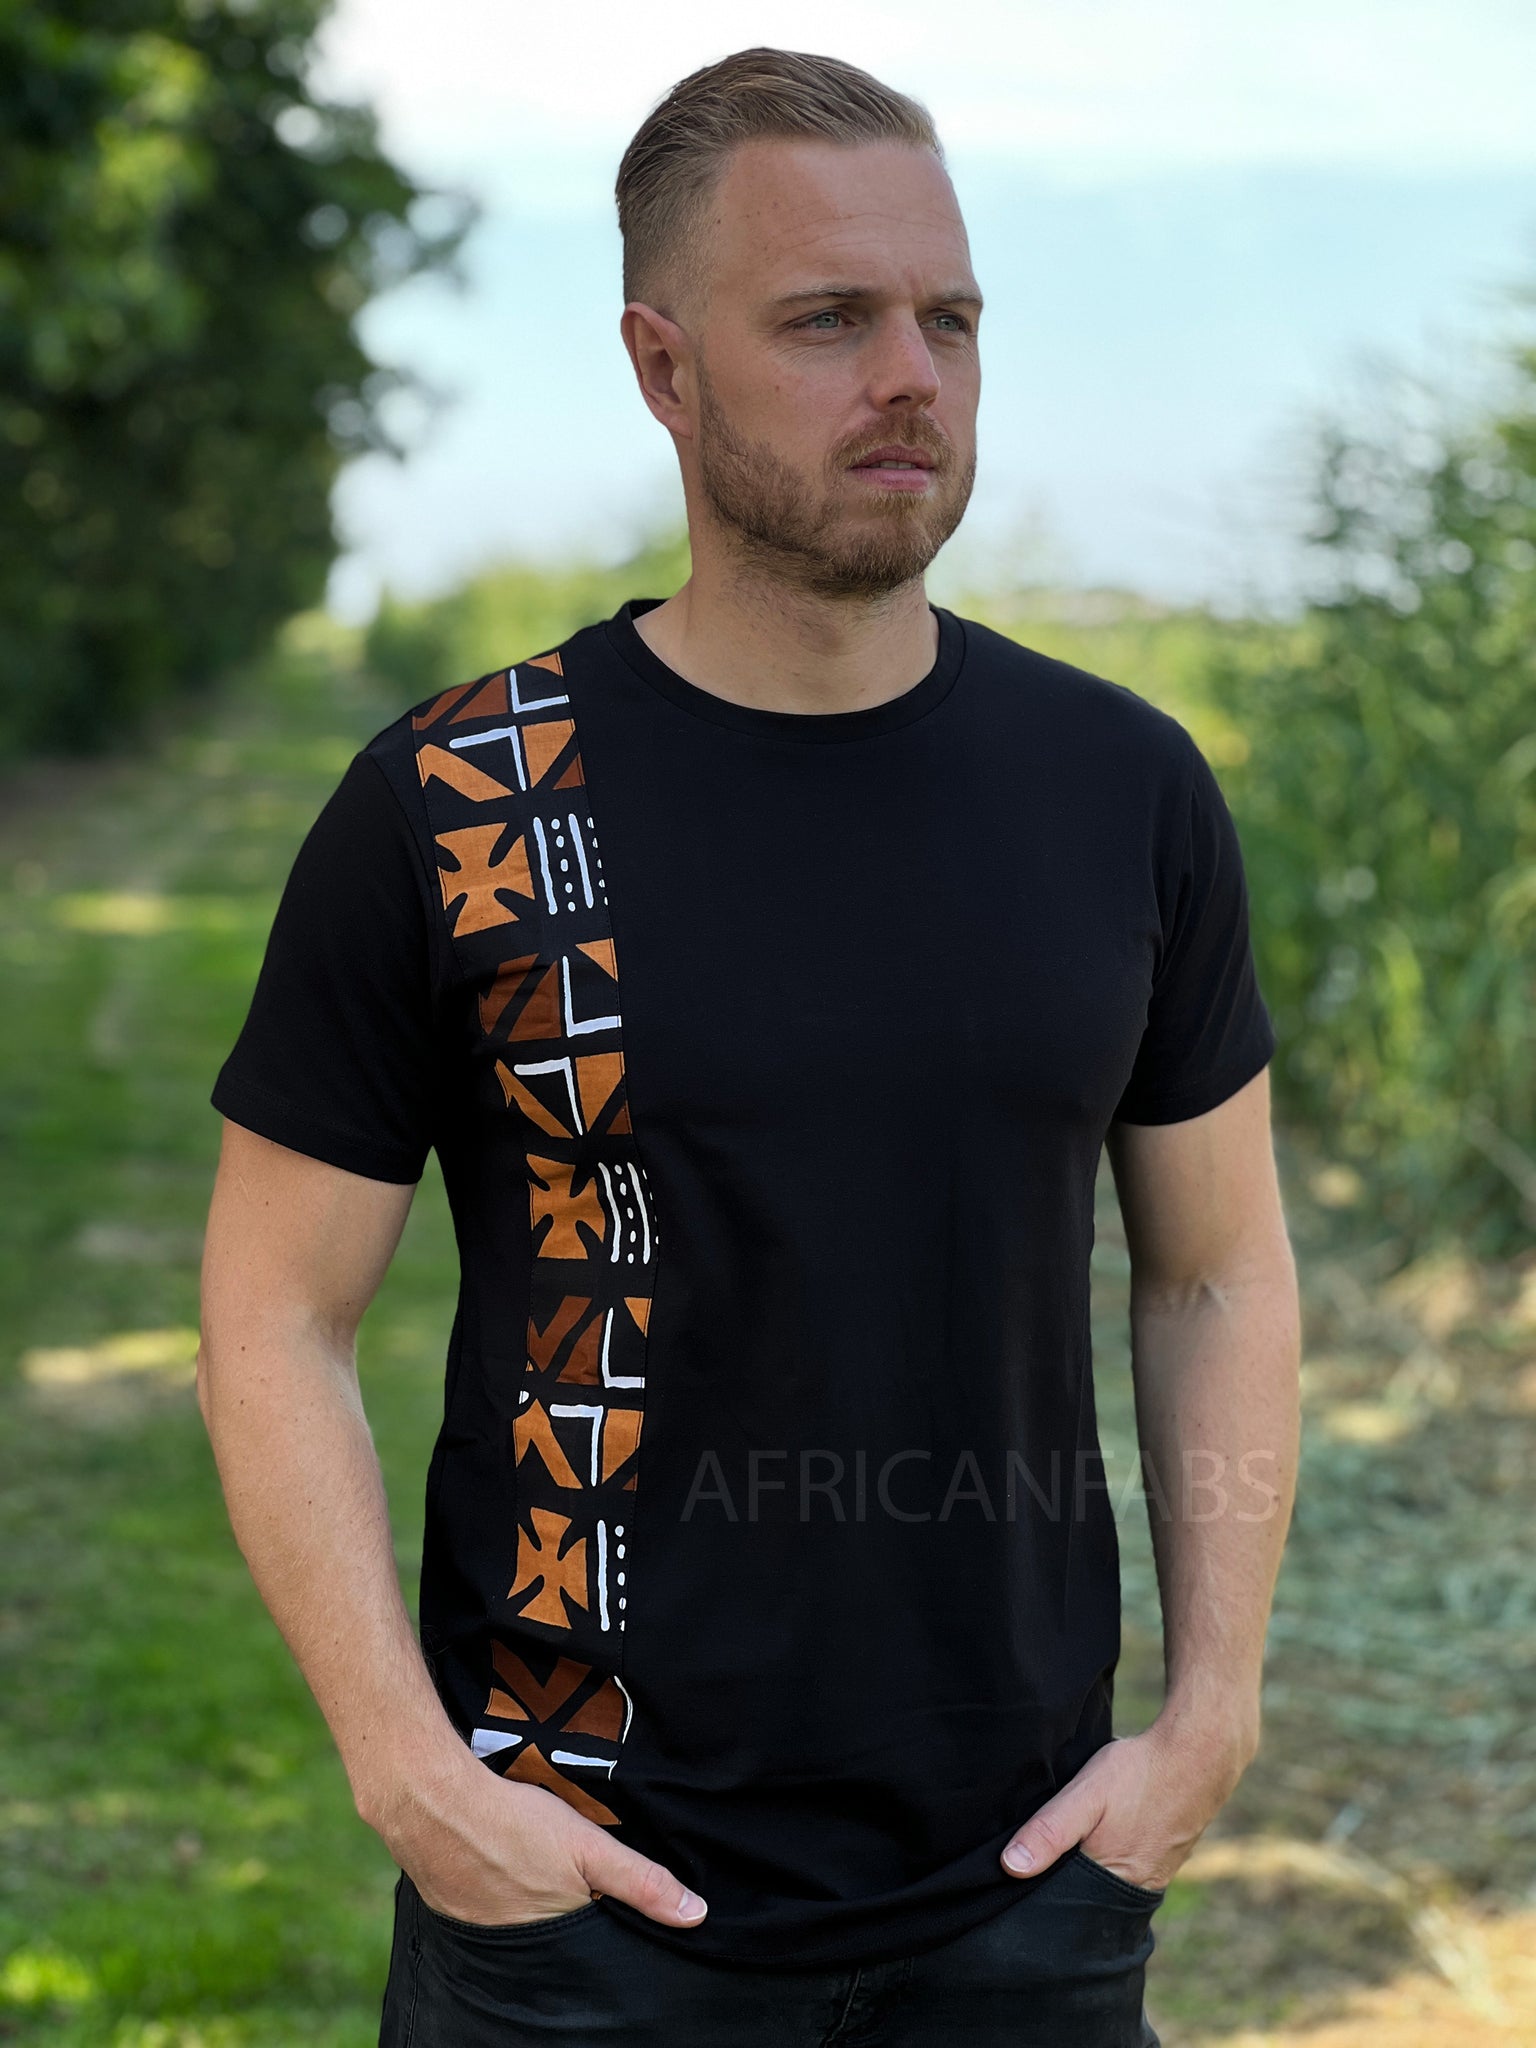 T-shirt with African print details -  Brown bogolan band